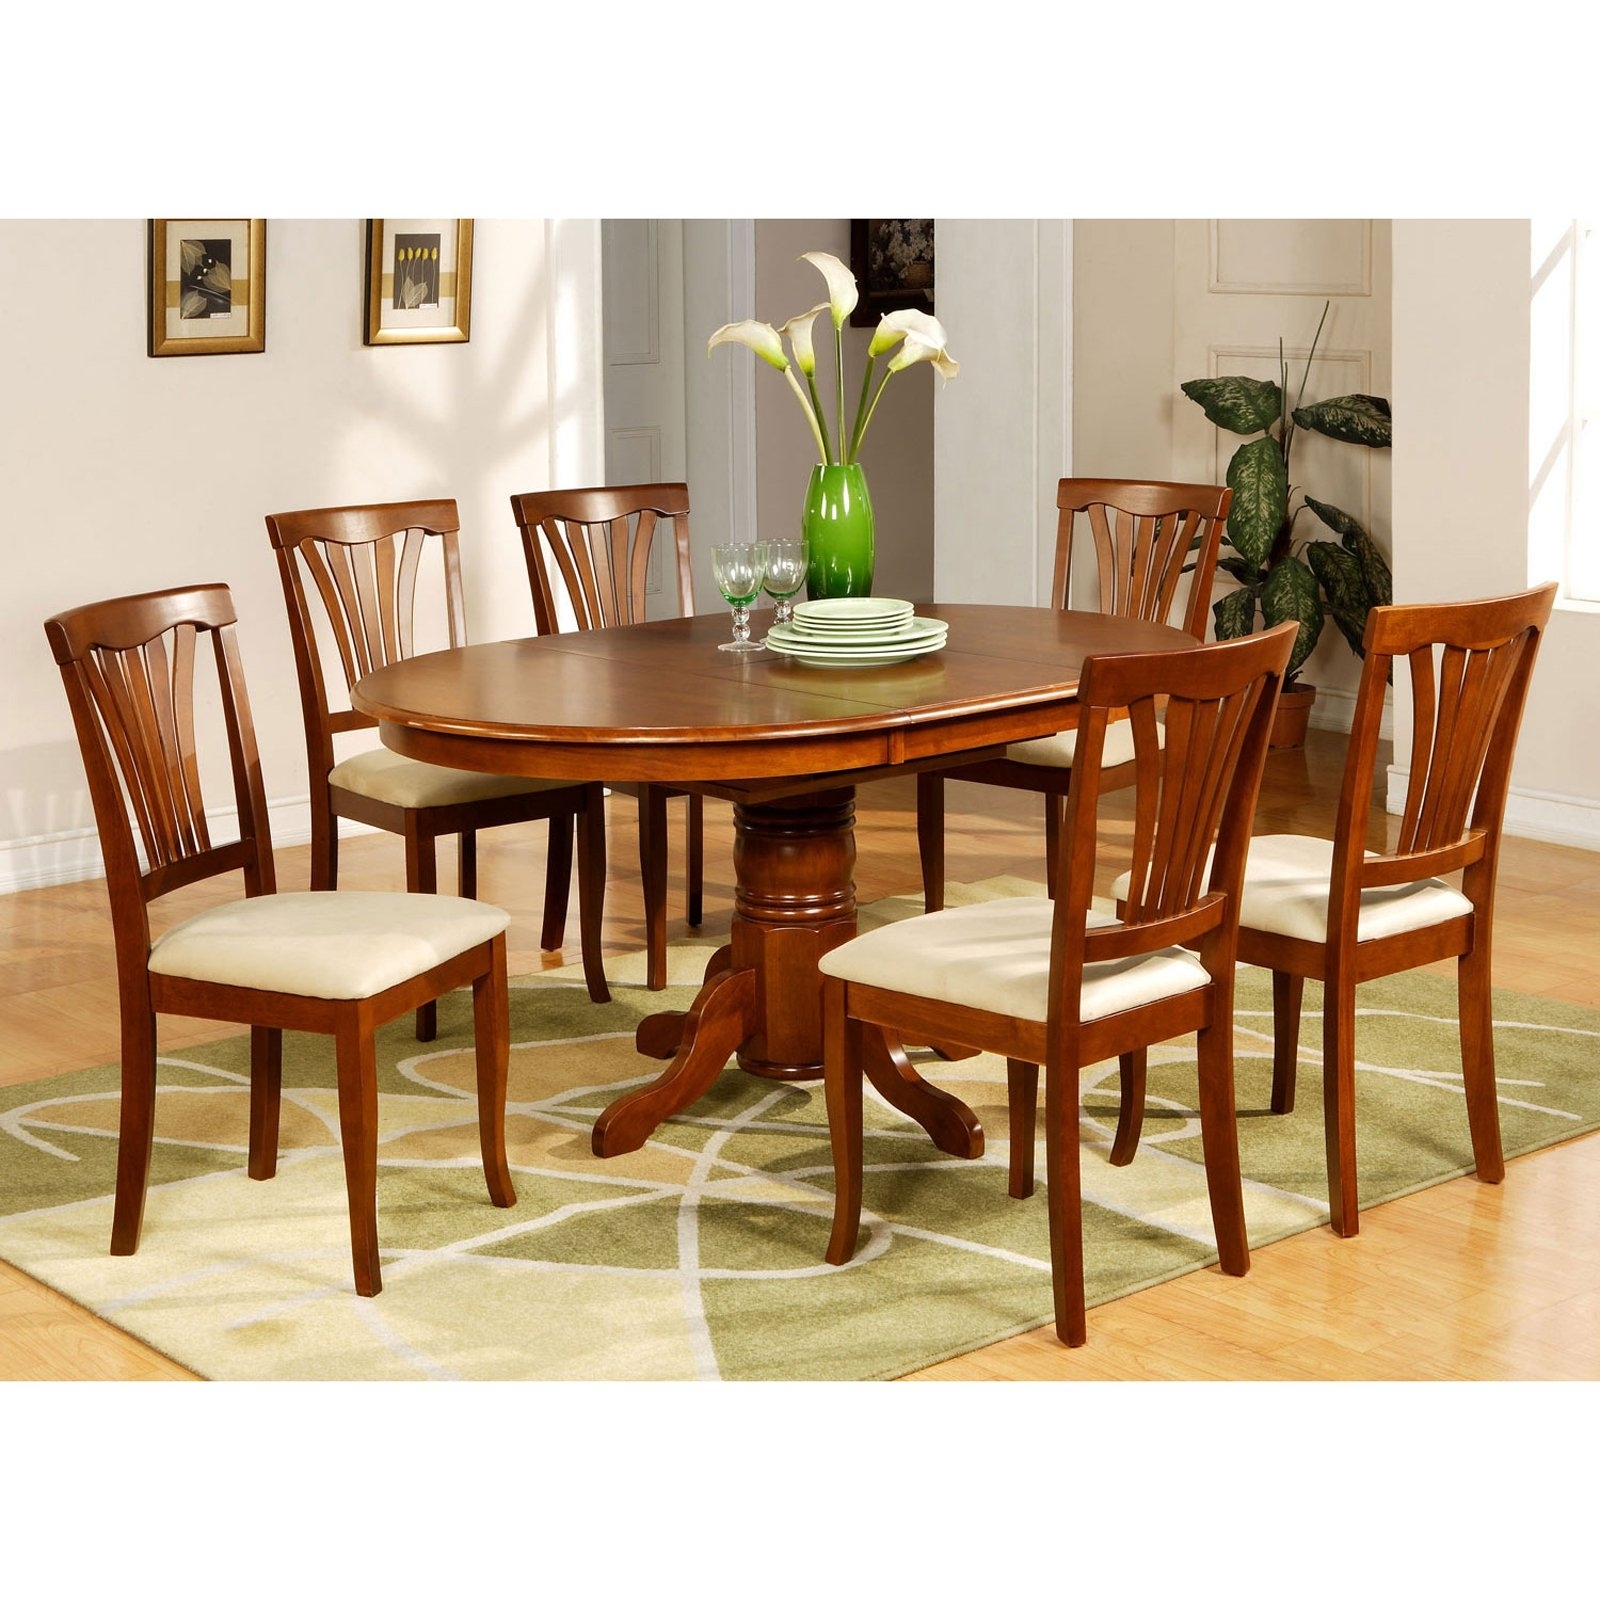 Oval Dining Table With Leaf Ideas On Foter